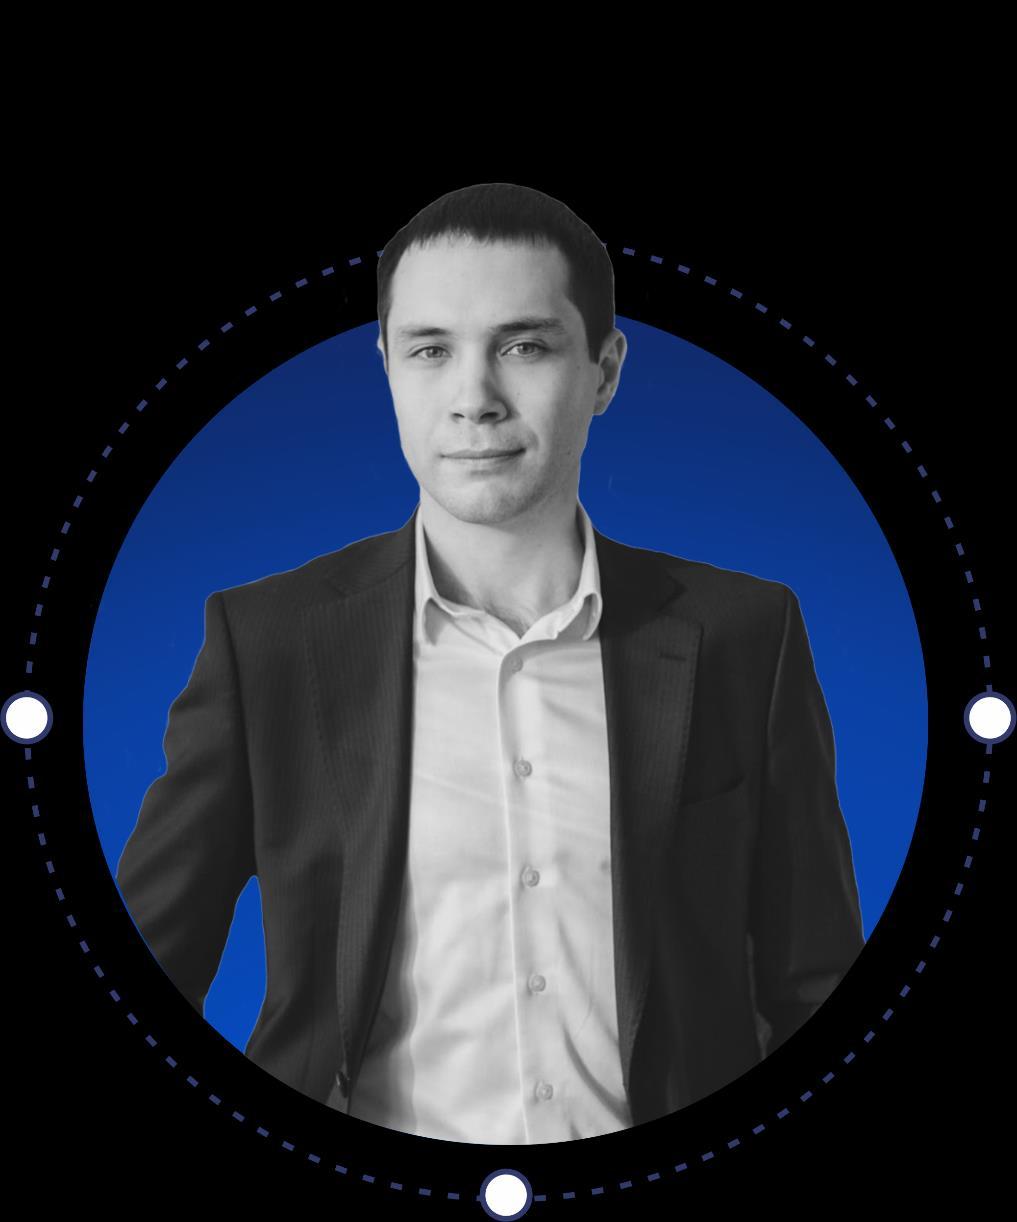 21 FINANCIAL STAR DMITRII KOTEGOV, CFA $150+ MILLION CLIENT PORTFOLIOS Dmitrii worked at ATON, the largest investment company in Russia, and managed $150 million assets of his clients.